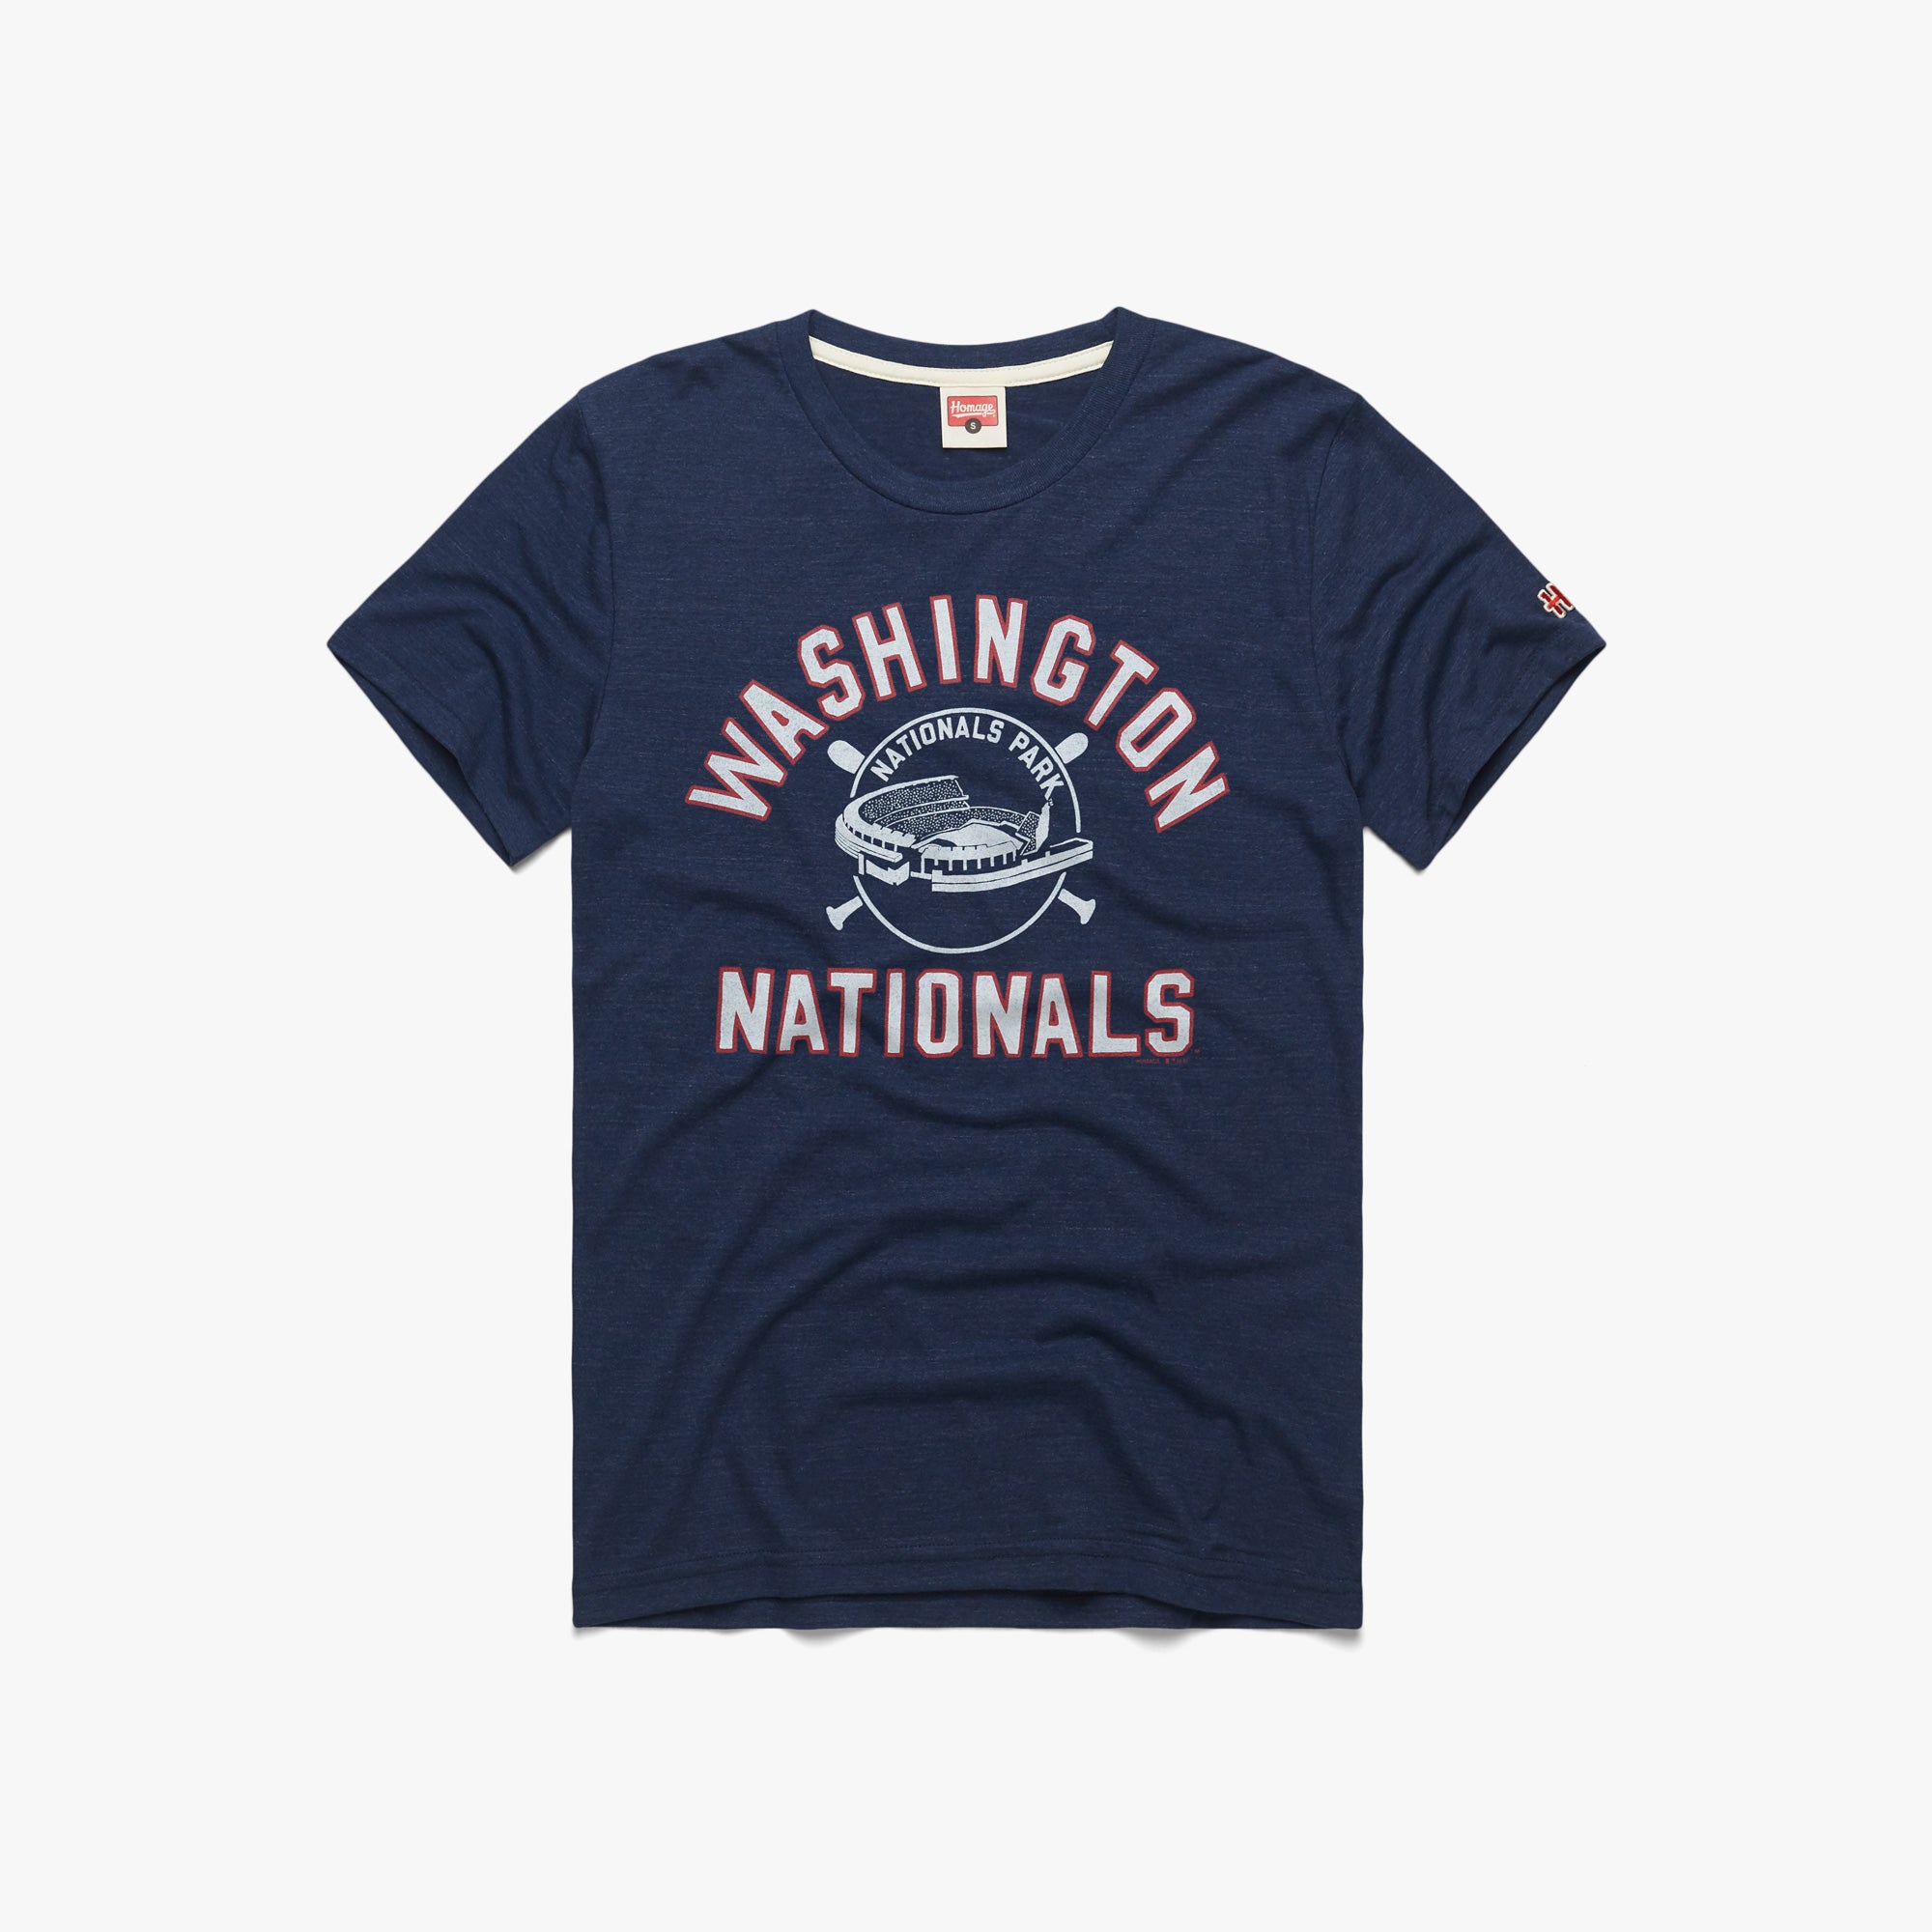 Washington Nationals Jersey For Youth, Women, or Men